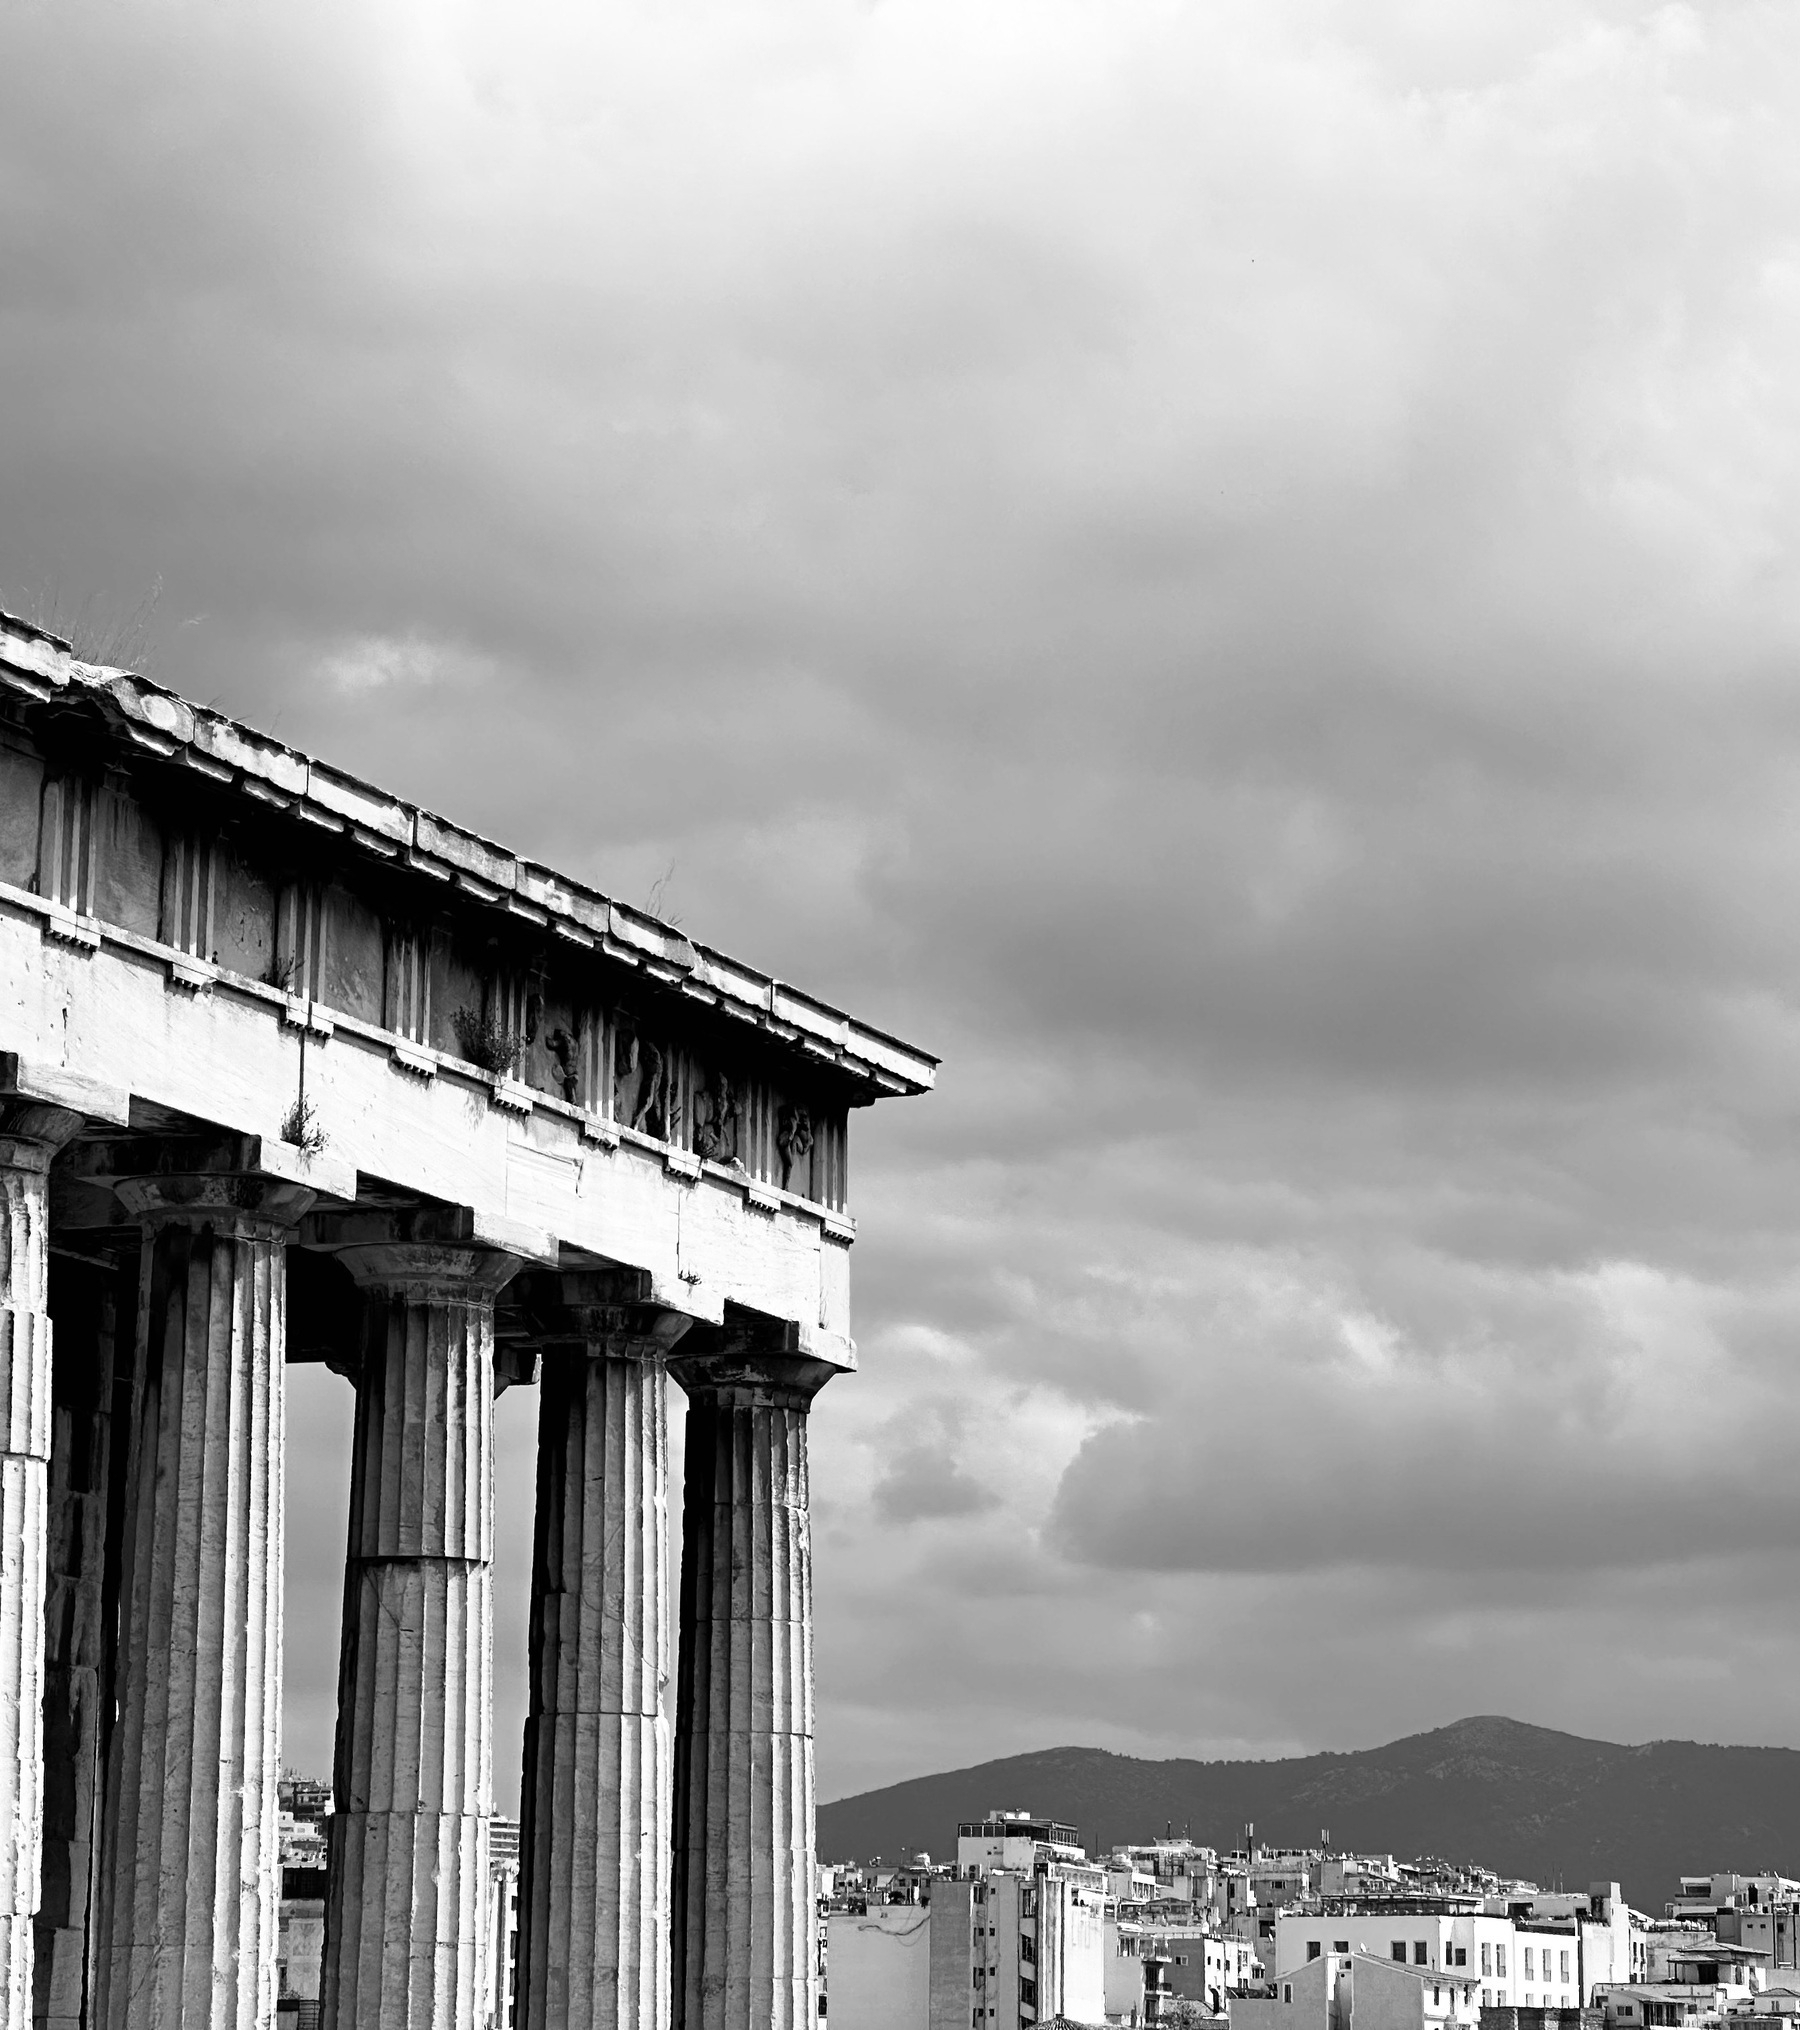 A Greek temple in the foreground, with modern buildings in the background, and hills in the distance. All under a cloudy sky.